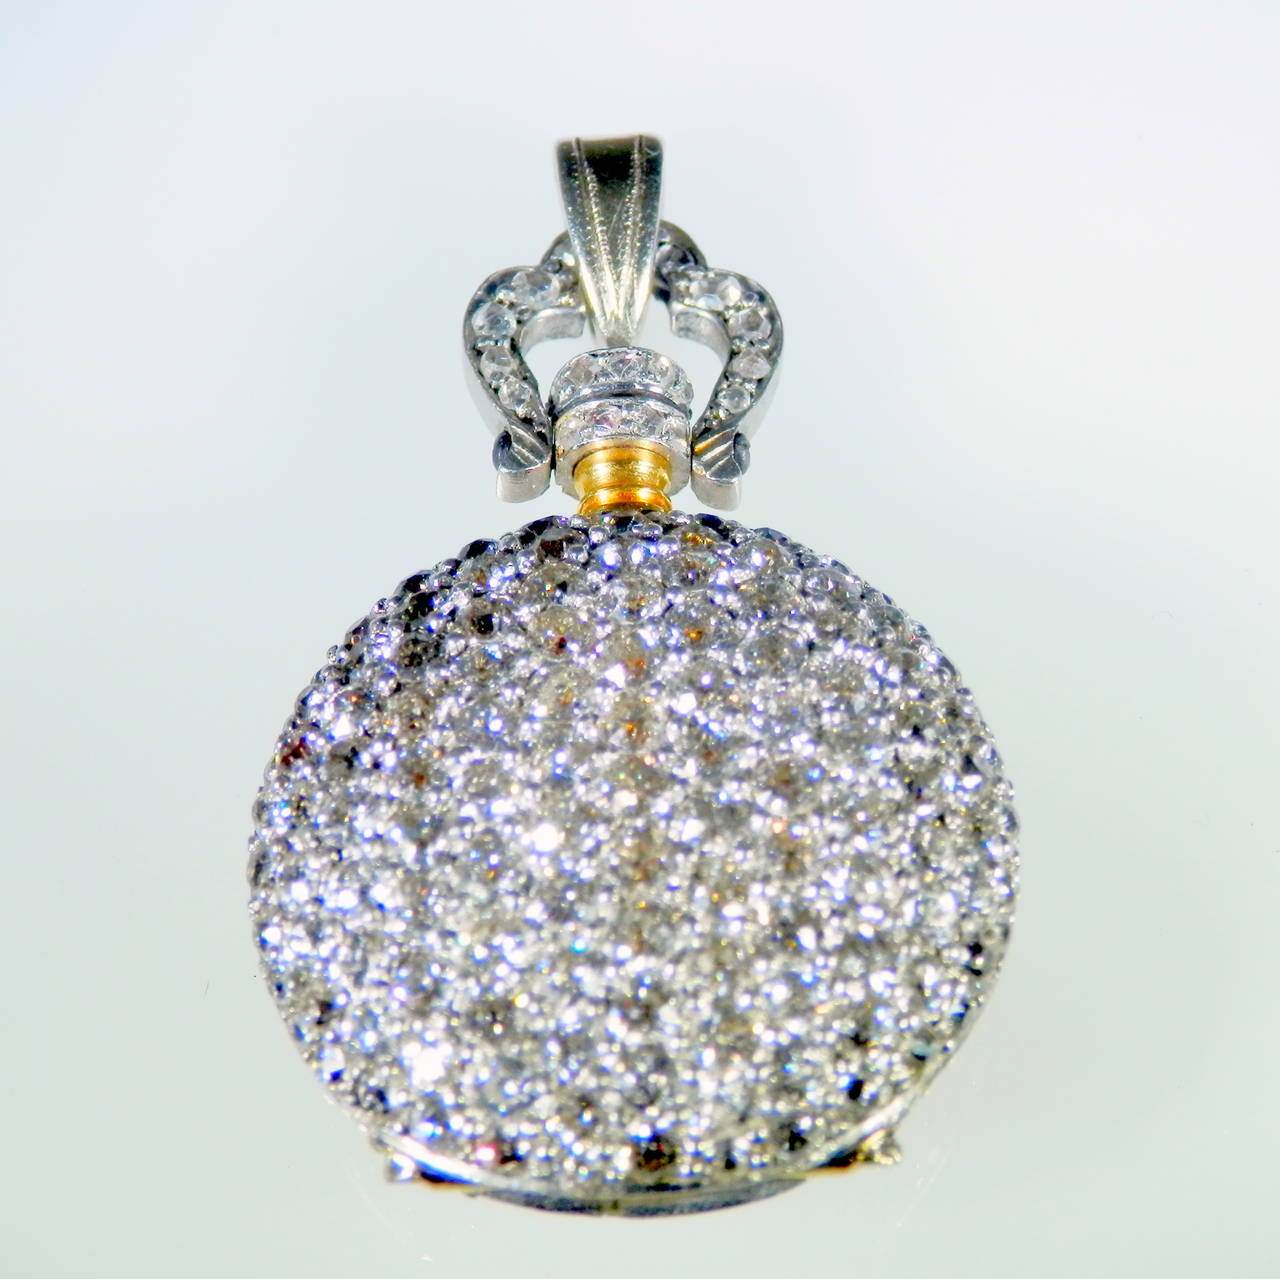 Lady's pave diamond platinum and gold pendant watch, c. 1915.  This is an exquisite all diamond pendant watch with rose cut and European cut diamonds all on a delicate chain.  It has recently been cleaned and oiled and keeps good time.  It has